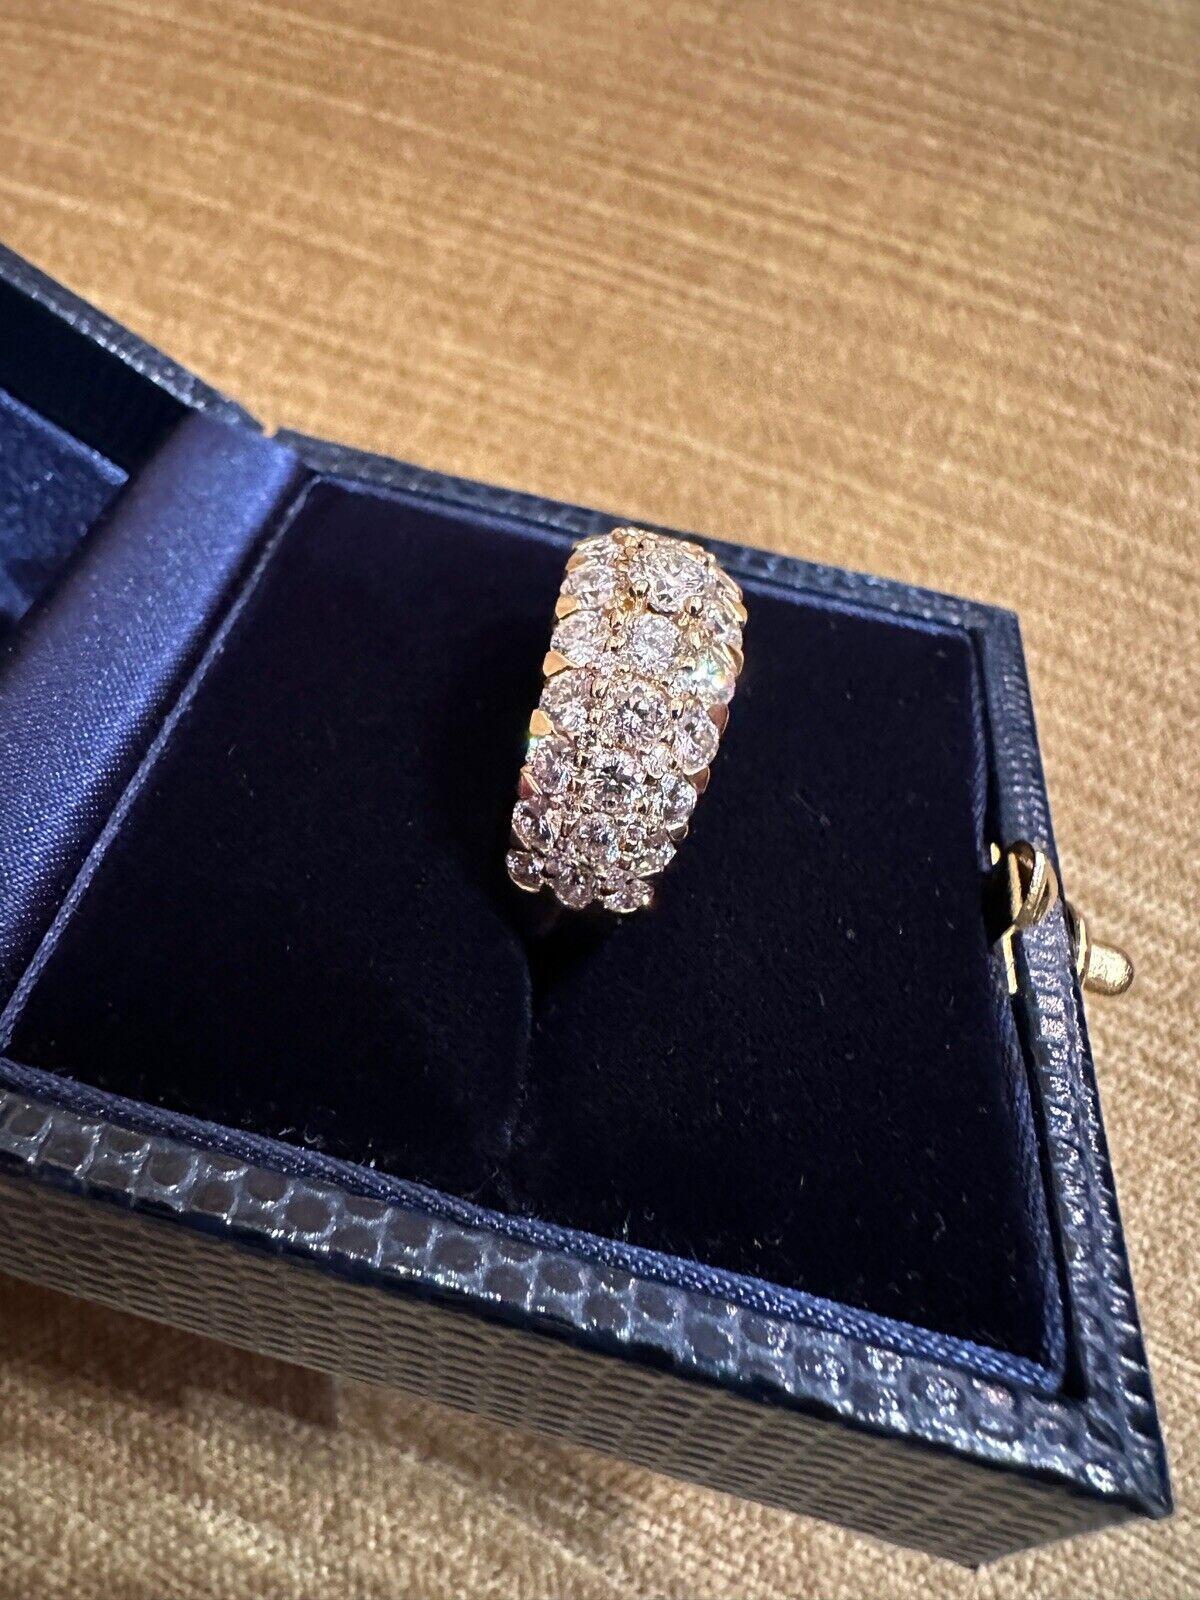 Pave Diamond Dome Ring 3.46 carat total weight in 18k Yellow Gold 

Diamond Dome Ring features Three Rows of Round Brilliant Diamonds with a larger center Diamond Pave set in 18k Yellow Gold.

The center diamond weighs .29 carats.
Total diamond